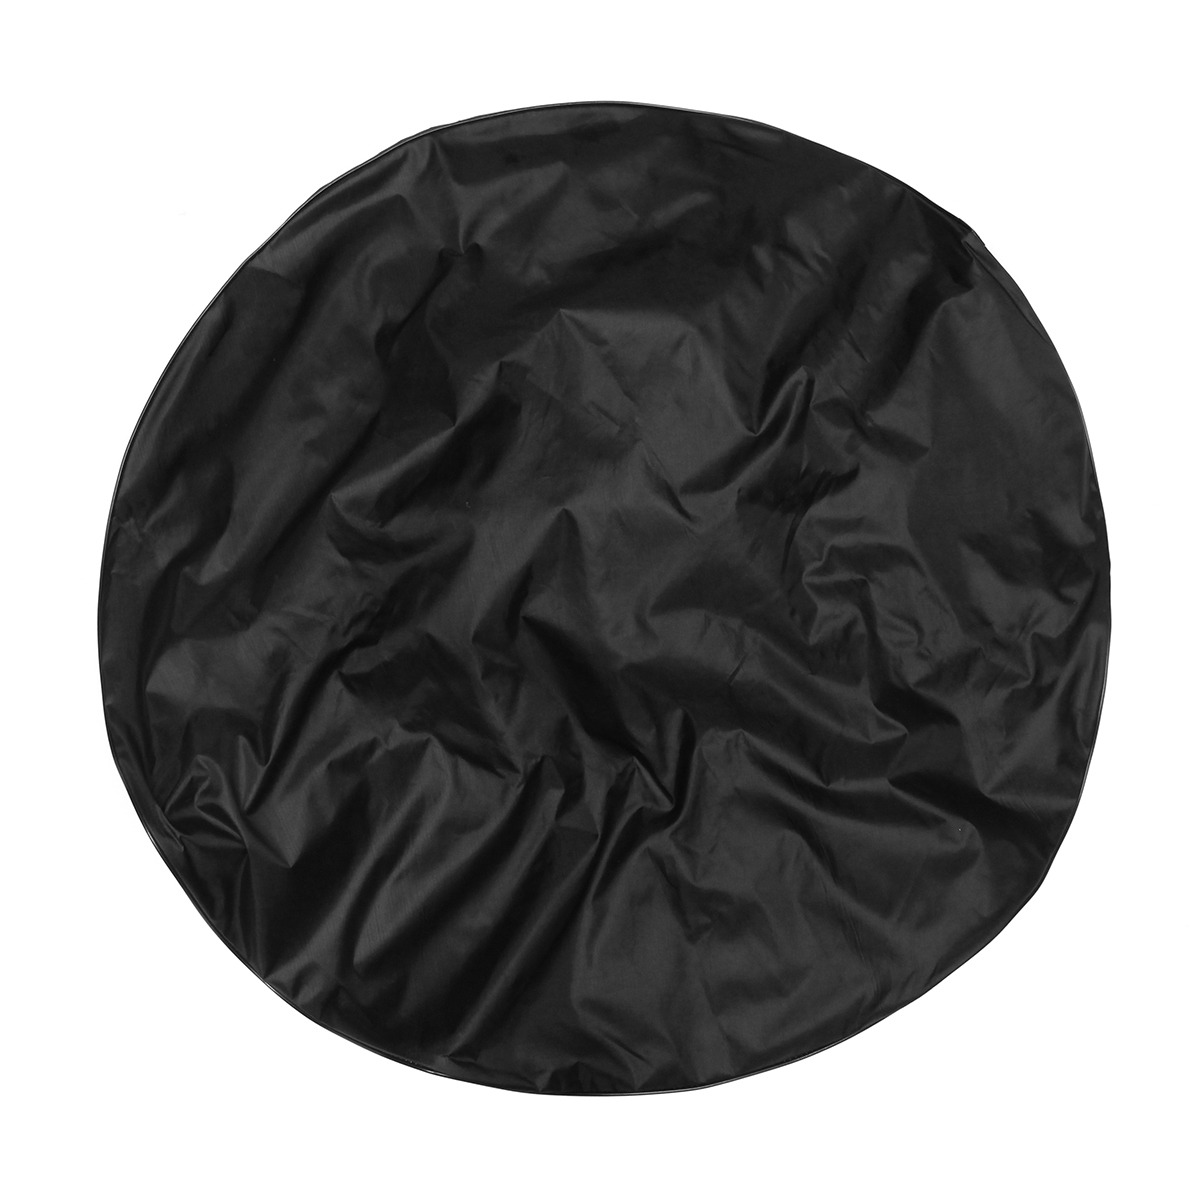 18-Inch-Black-Spare-Wheel-Car-Tire-Cover-PU-Leather-For-Wrangler-1387657